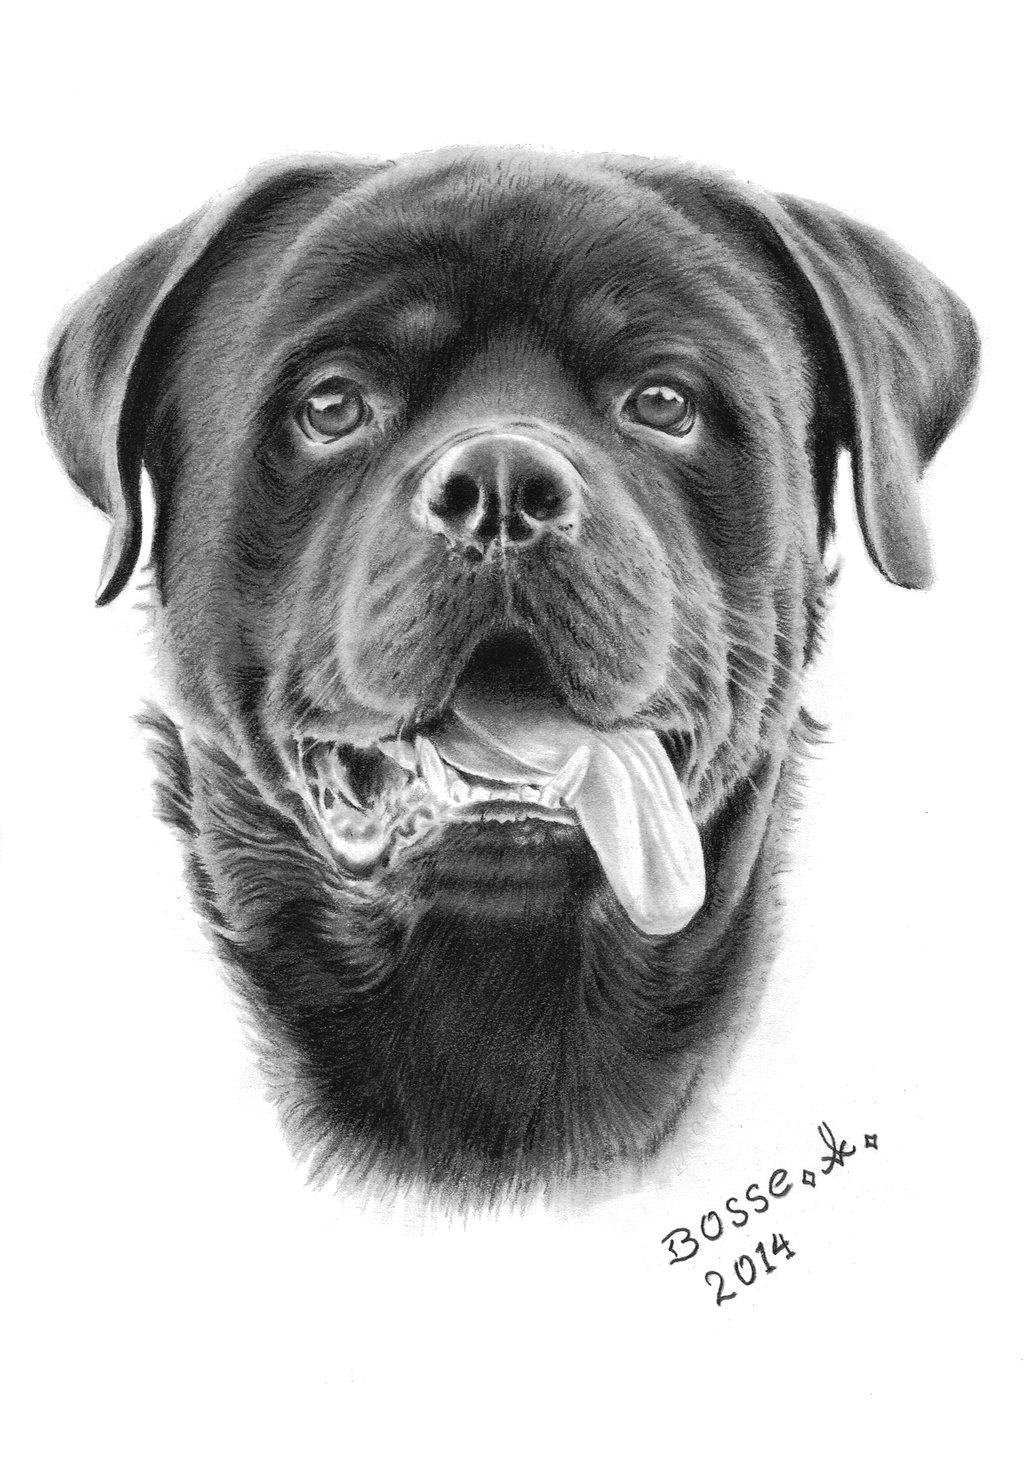 Drawing Rottweiler Dog Pin by Dog Breeds On Aaa Dog Portraits Pinterest Rottweiler